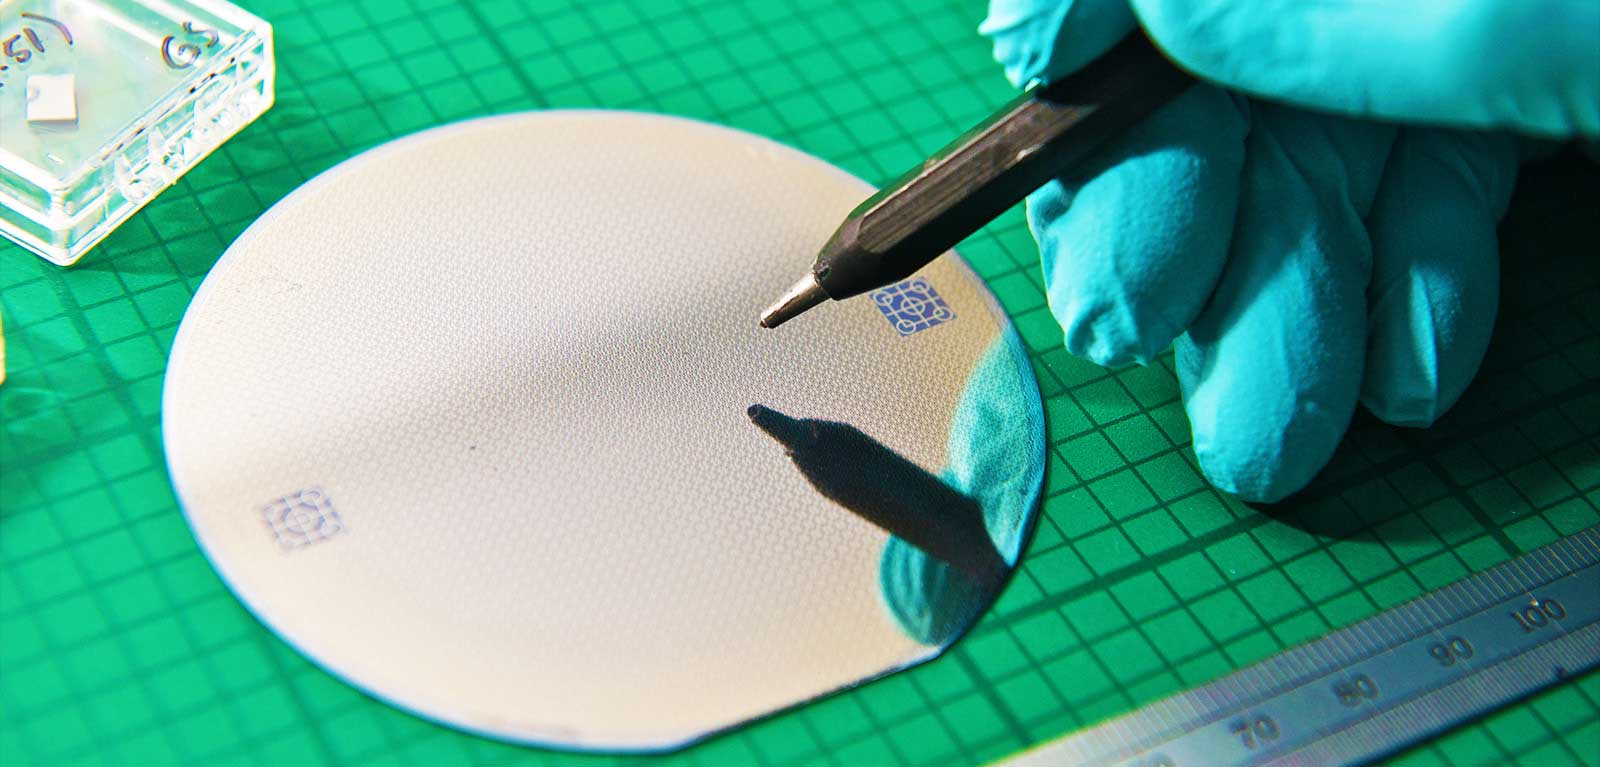 Circular mirror being manipulated with a pen-like device